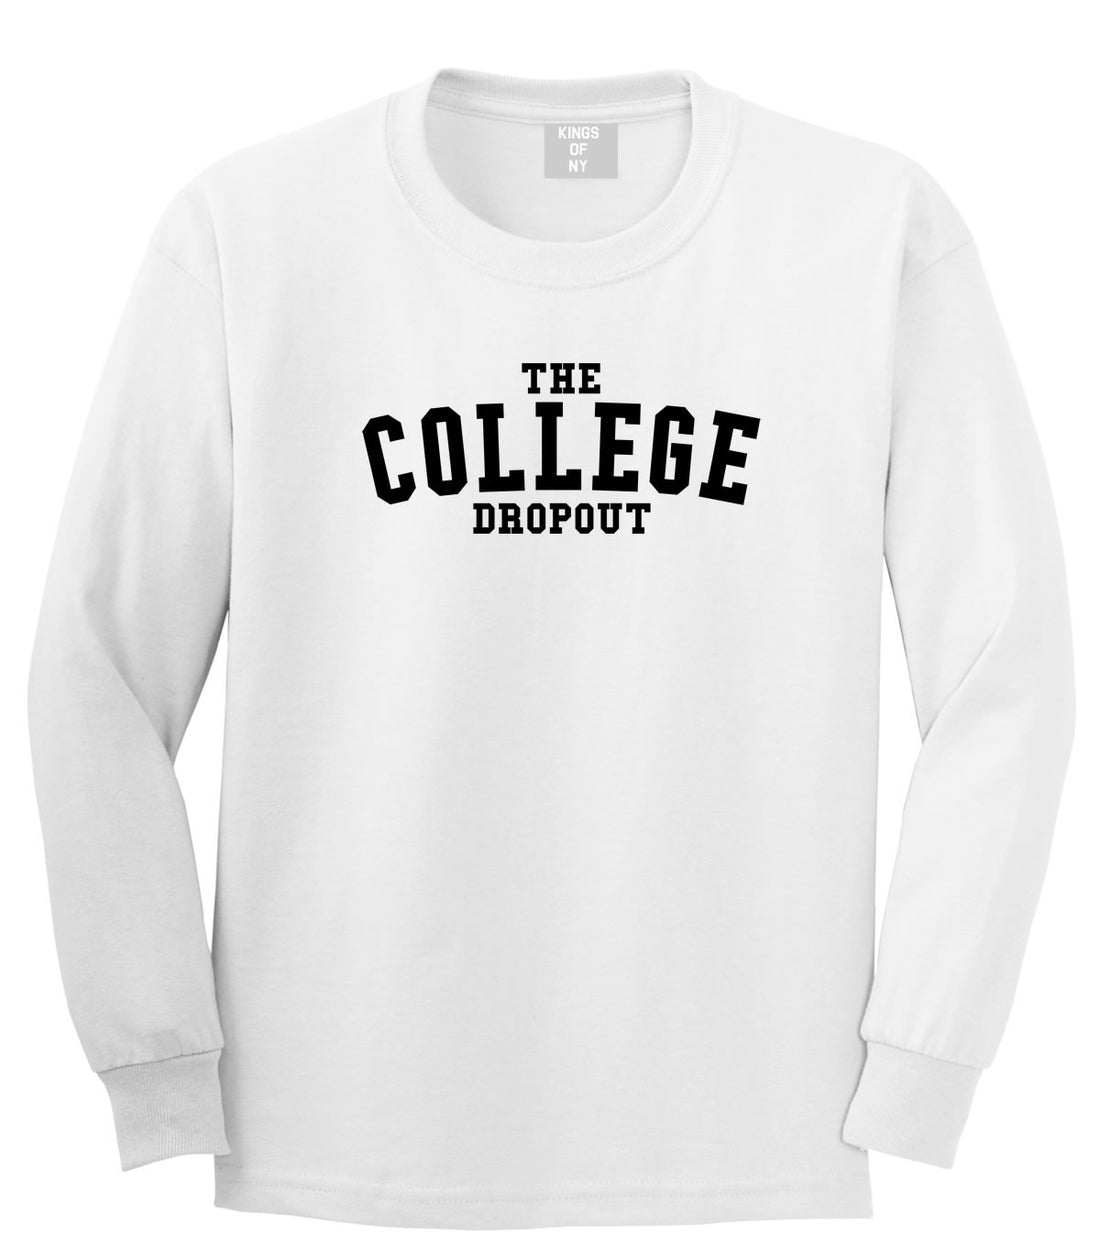 The College Dropout Album High School Long Sleeve T-Shirt in White By Kings Of NY